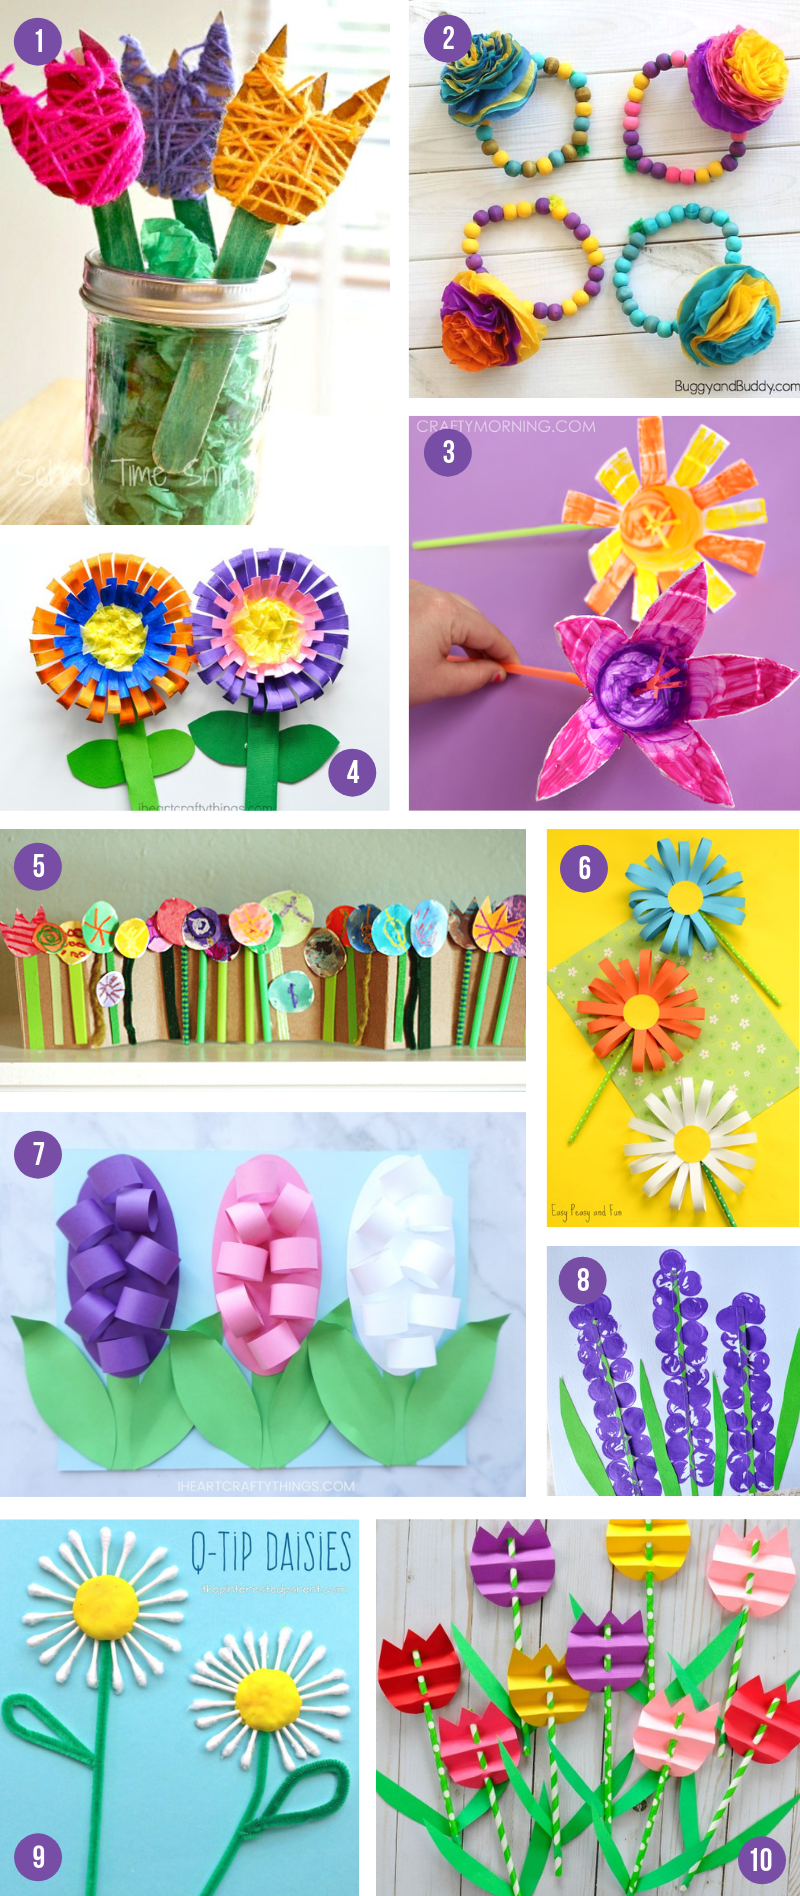 The Epic Collection Of Spring Crafts For Kids - All The Best Art Projects & Activities To Celebrate The Season -   19 simple crafts kindergarten ideas